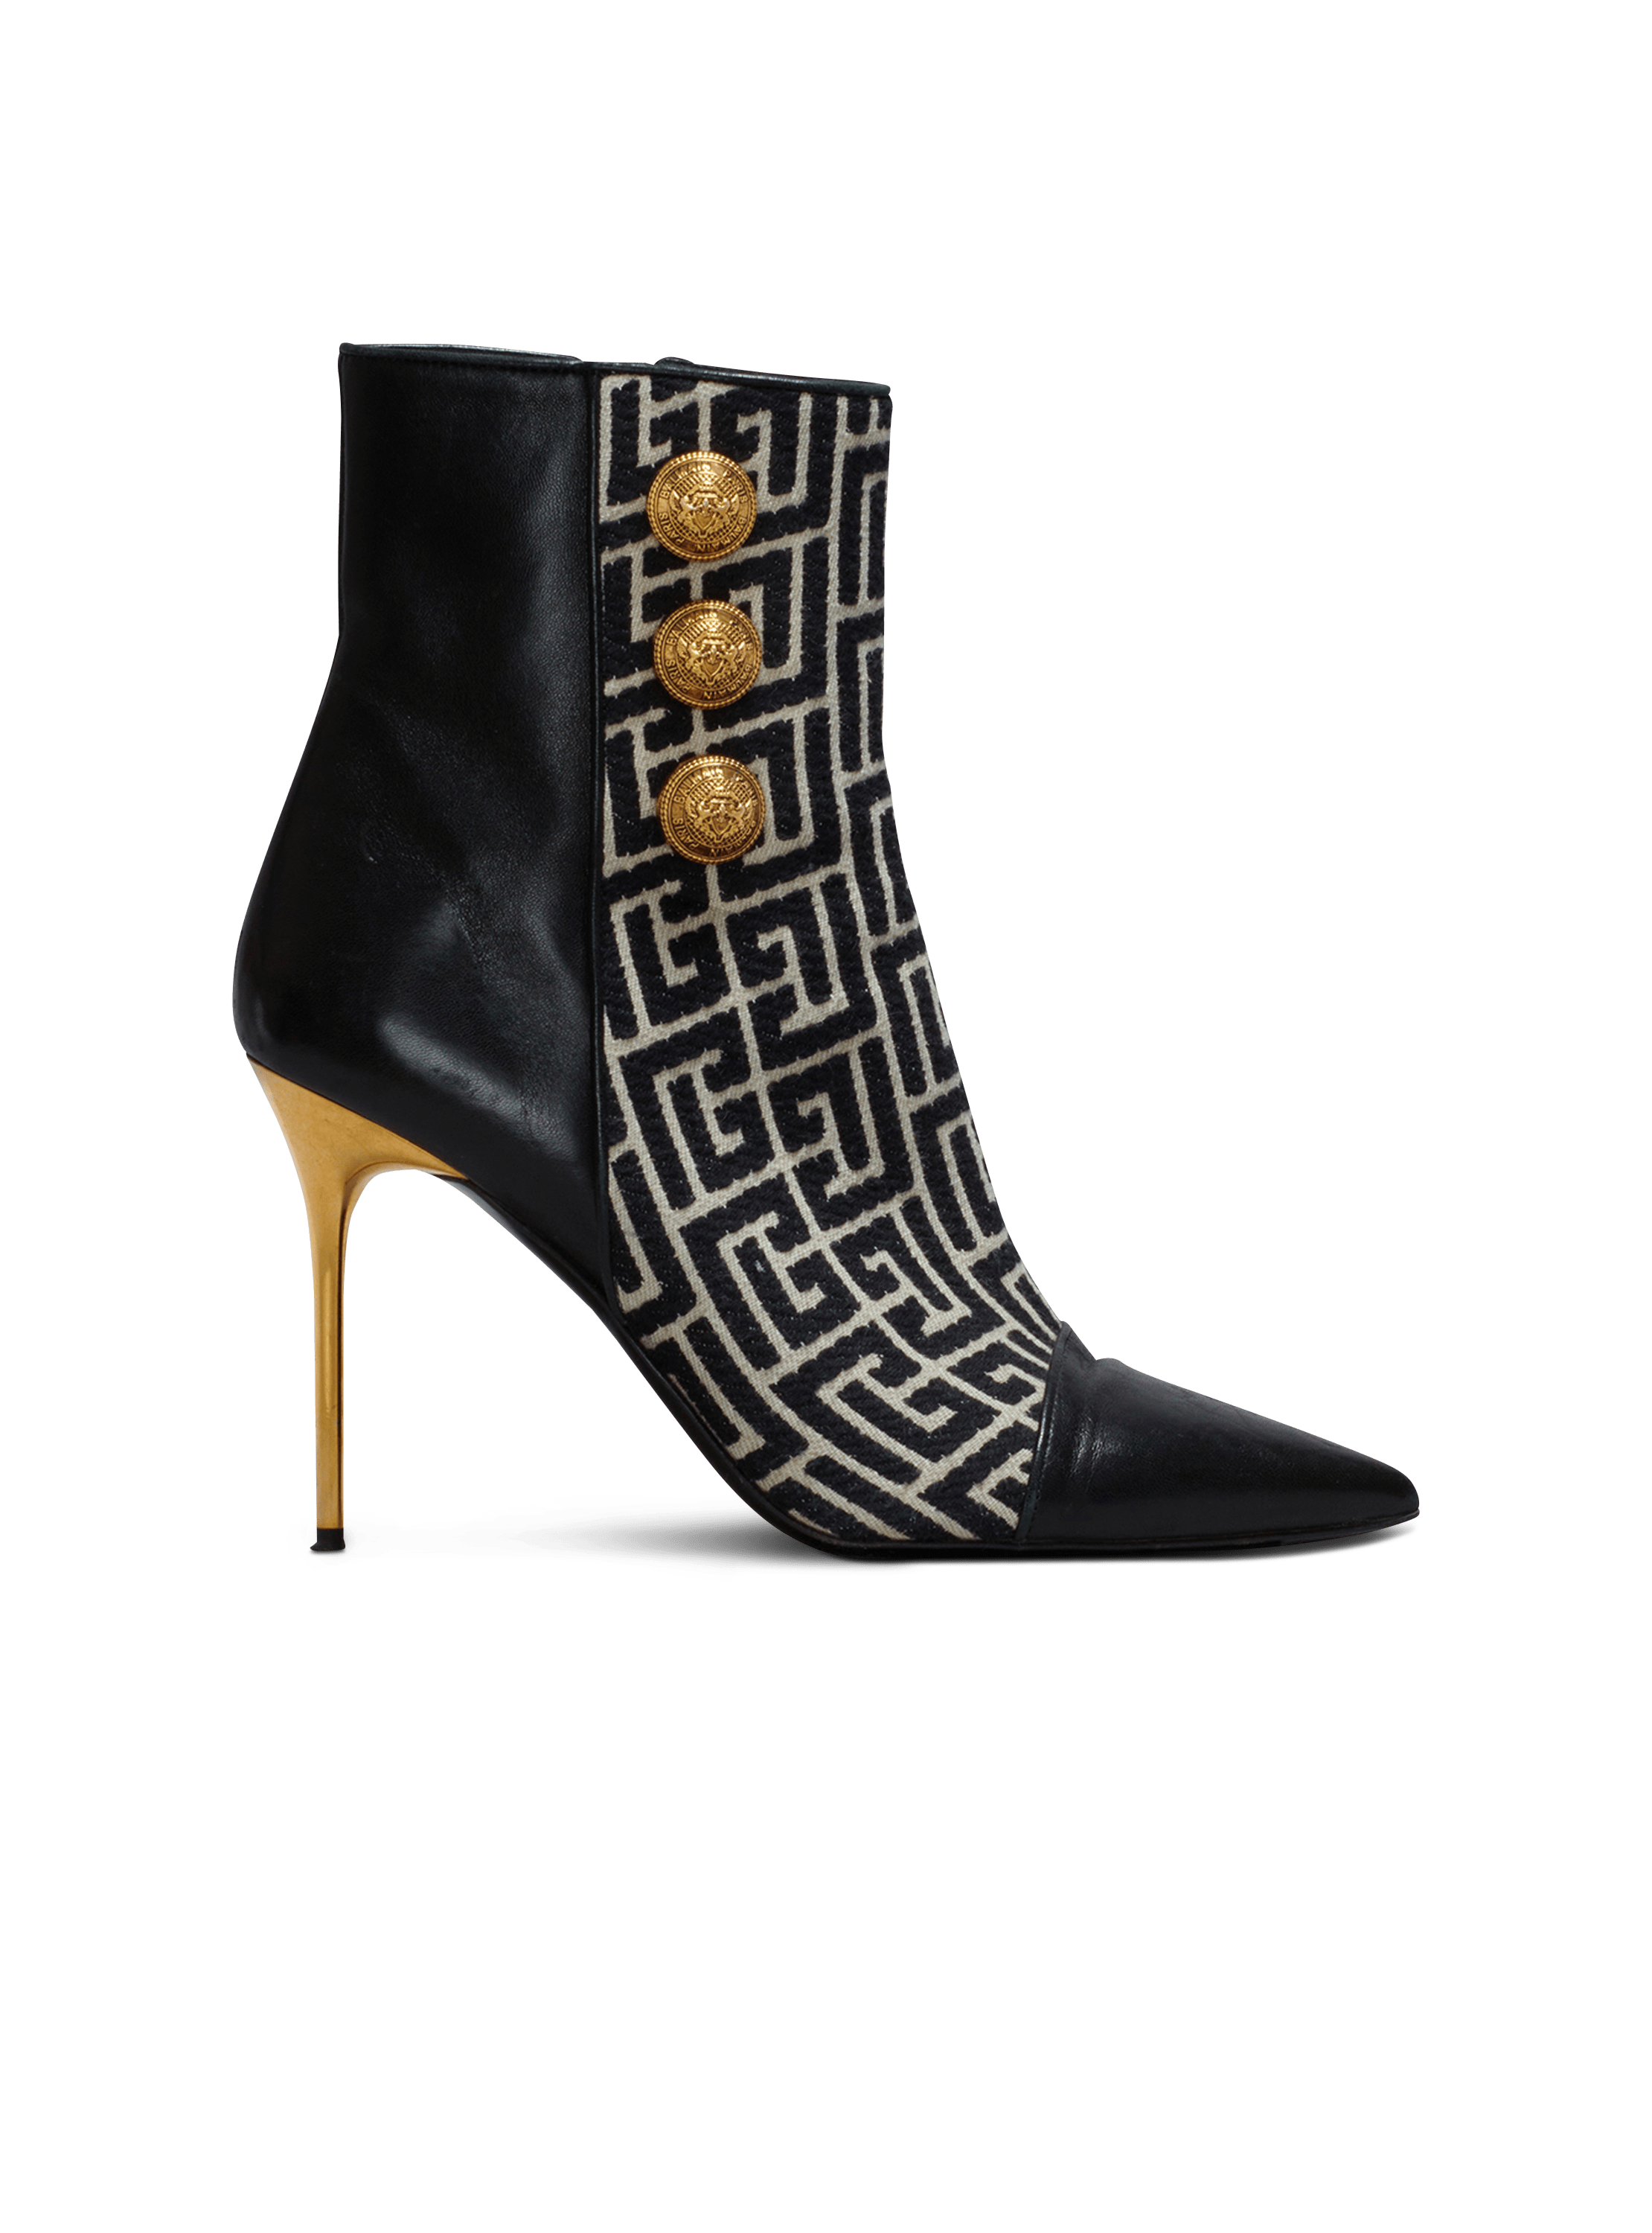 Jacquard monogram and leather Roni ankle boots, black, hi-res